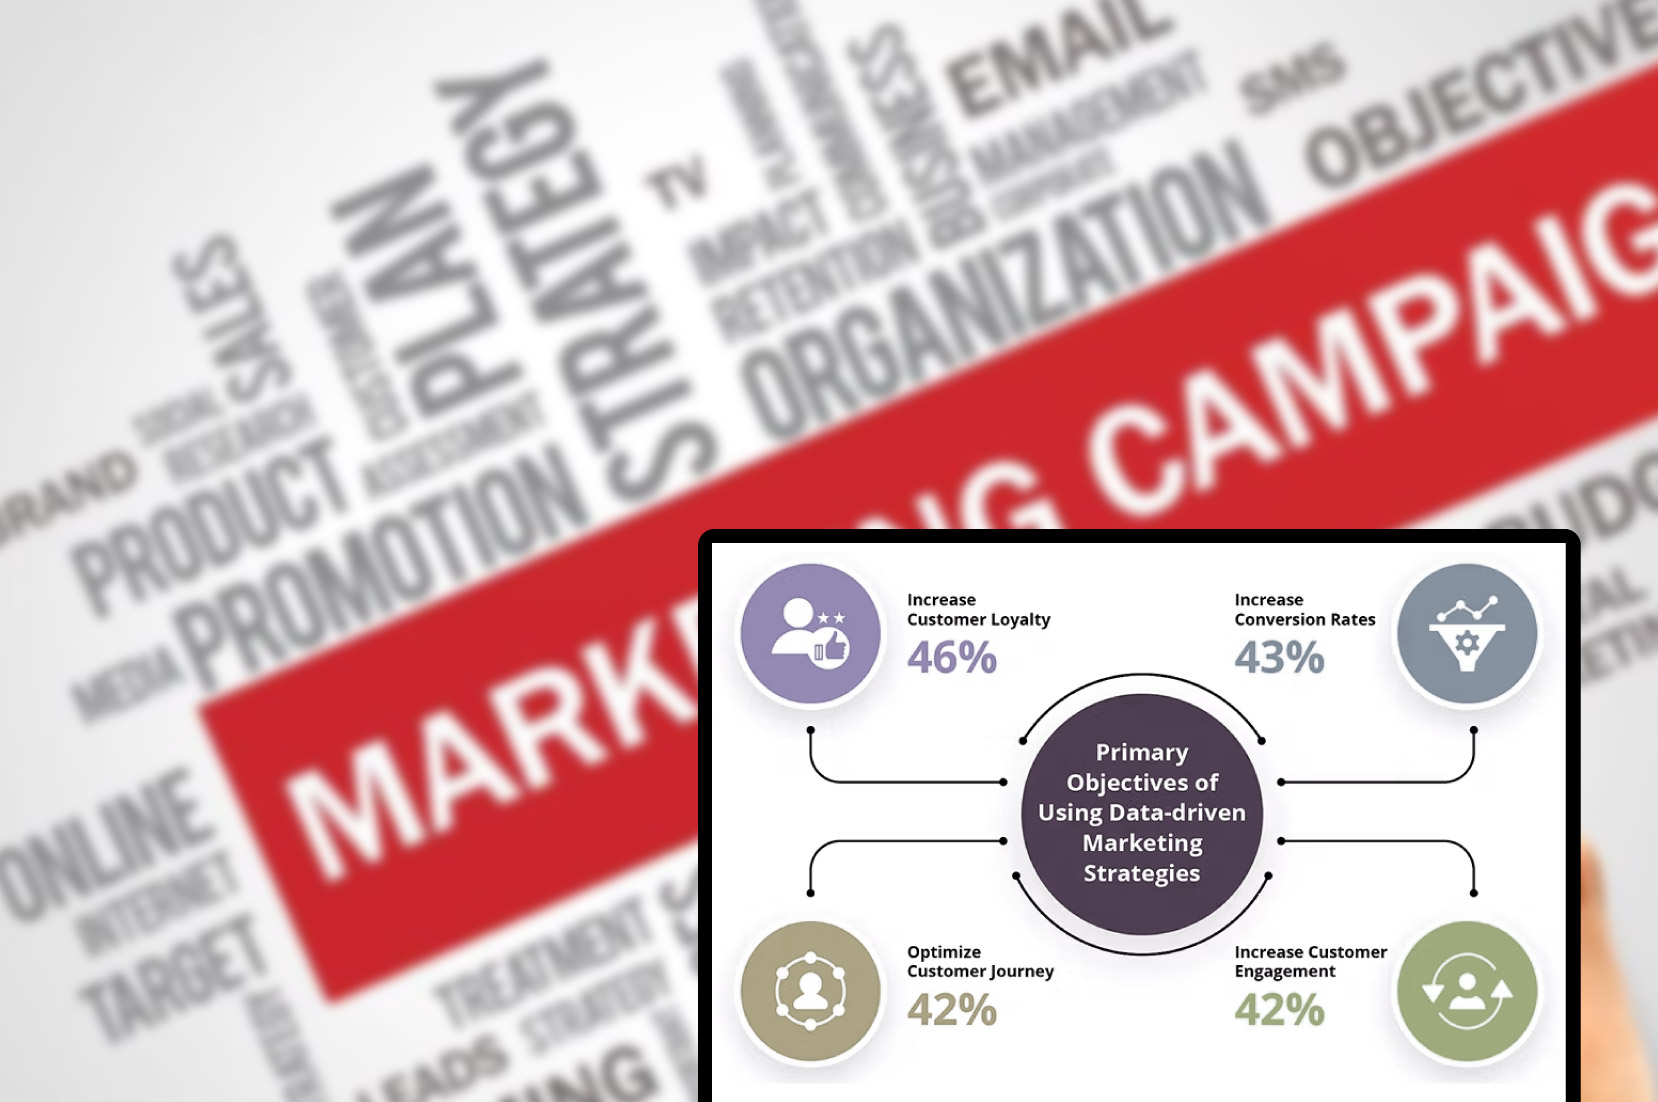 Maximize-the-impact-of-your-marketing-campaigns-with-data-rich-strategies